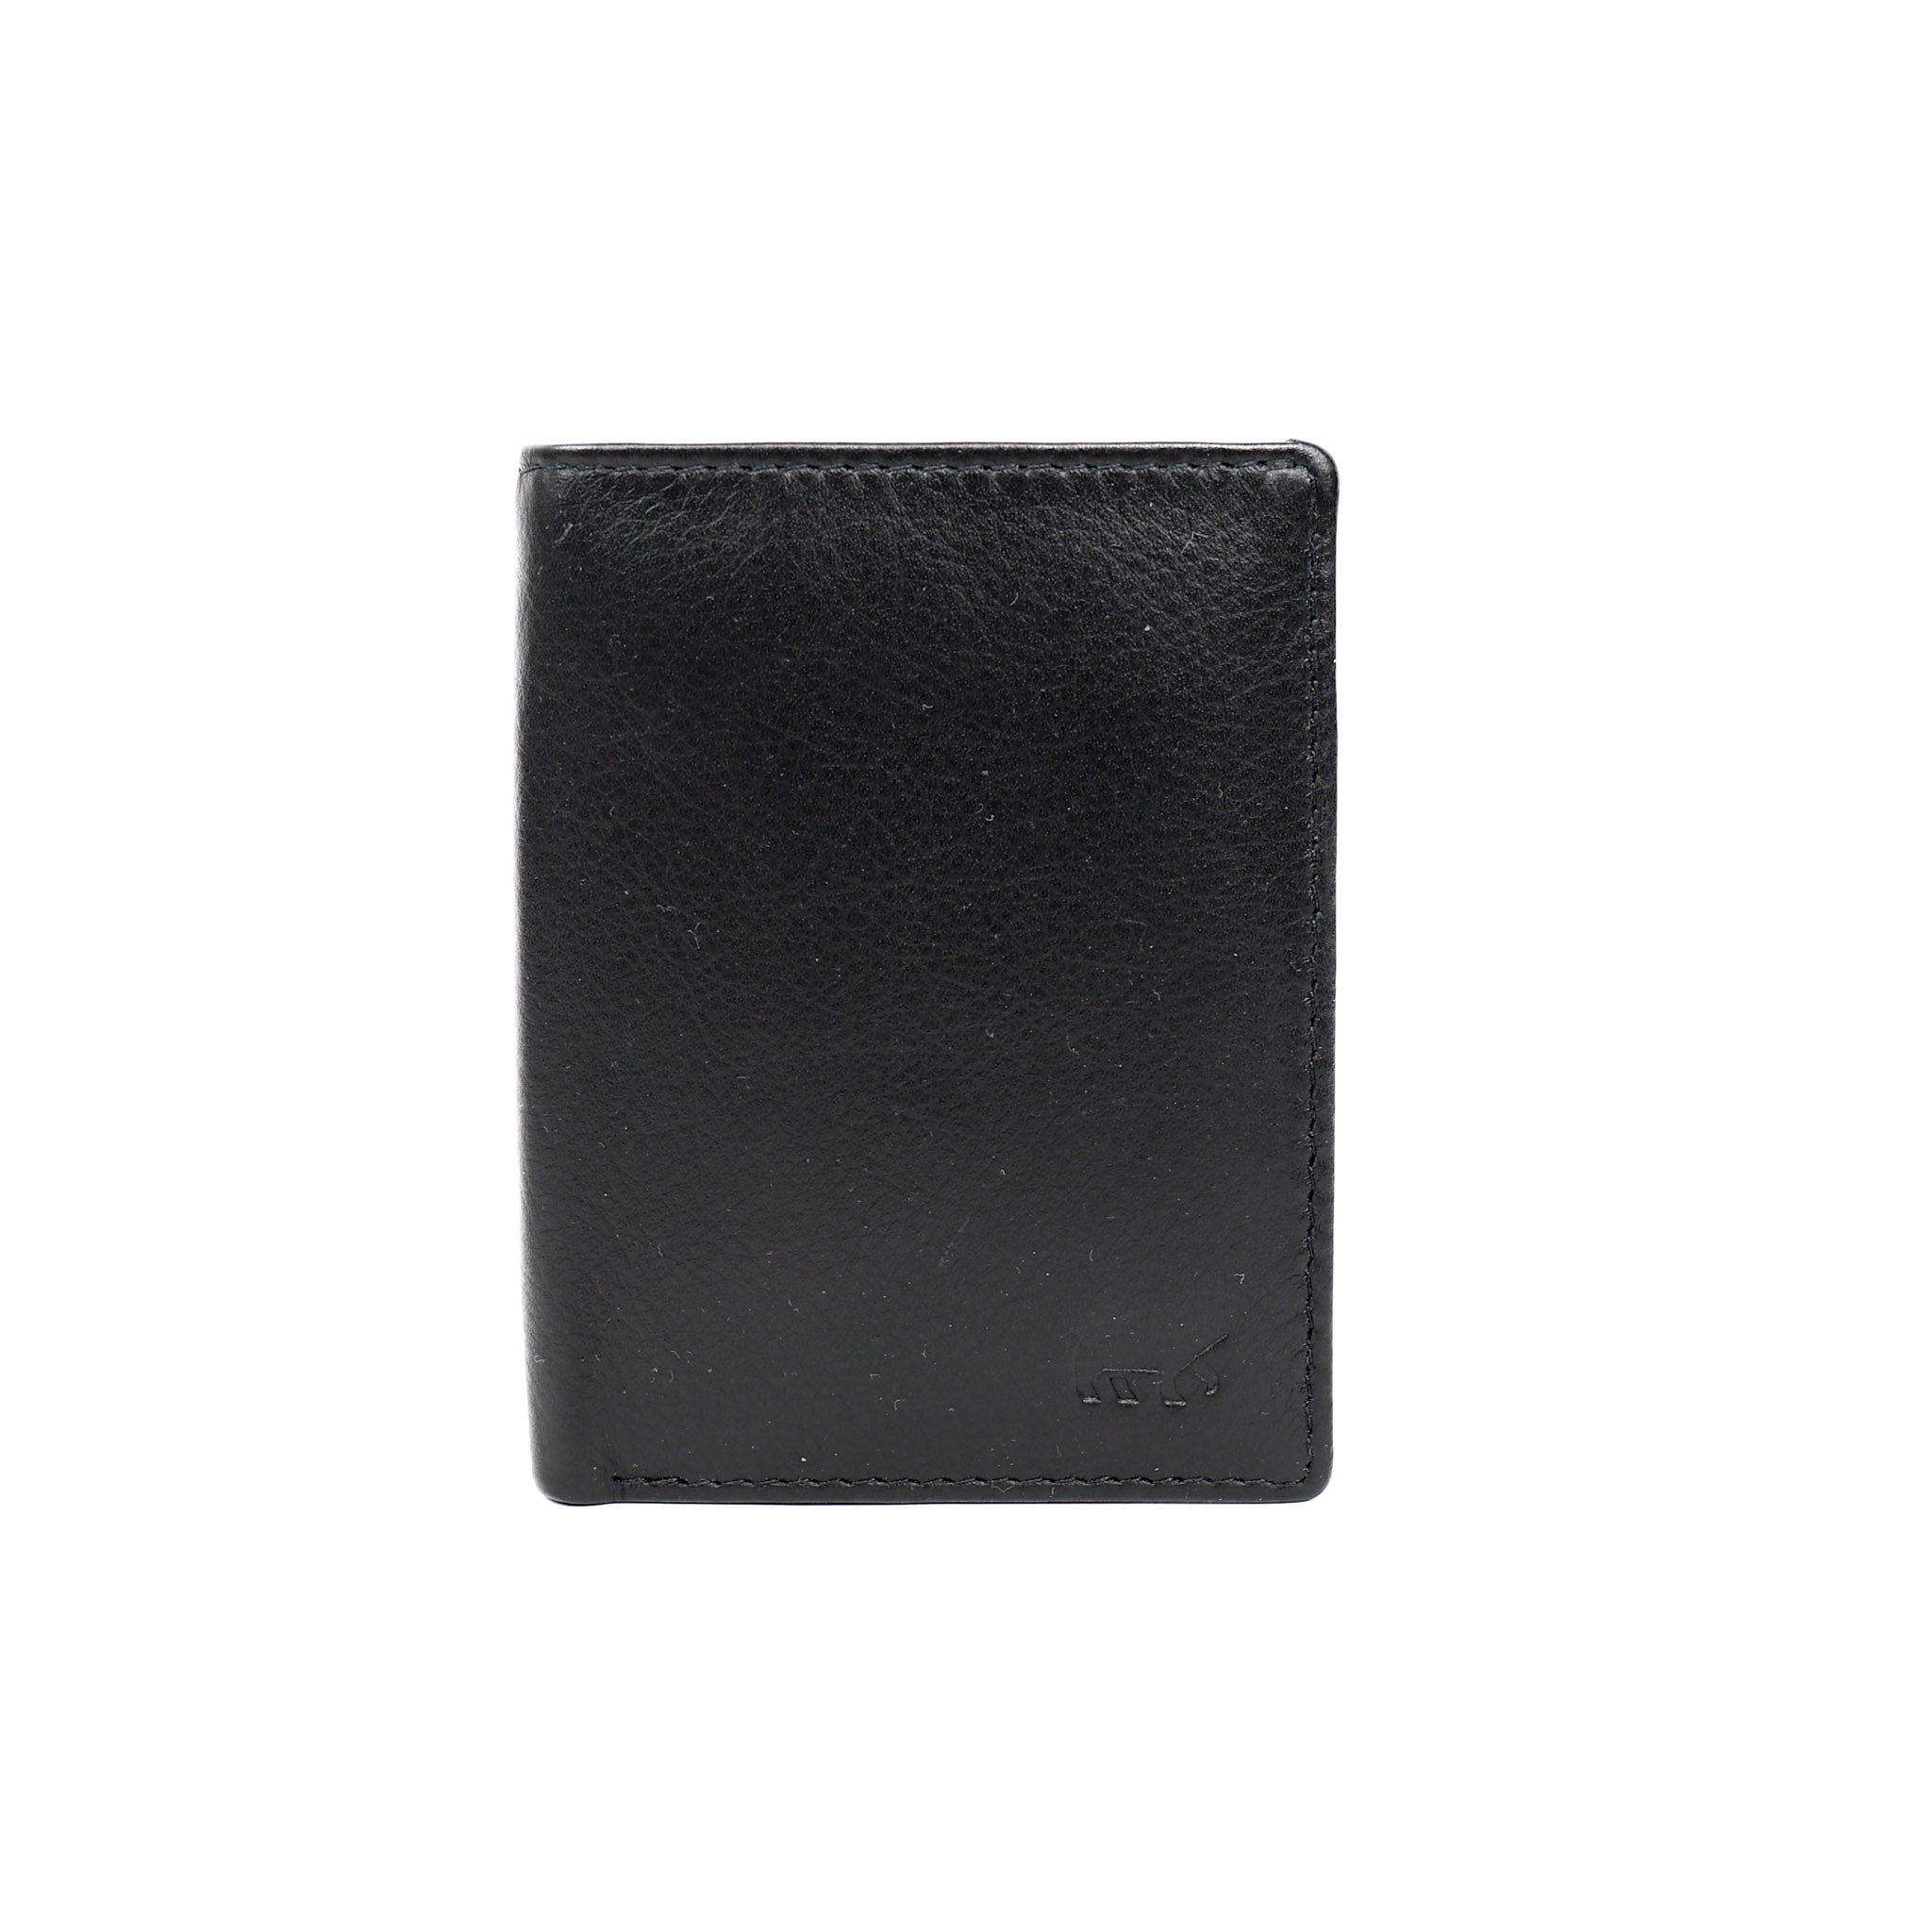 Filter-thin card wallet FR 14417 with bill compartment Black